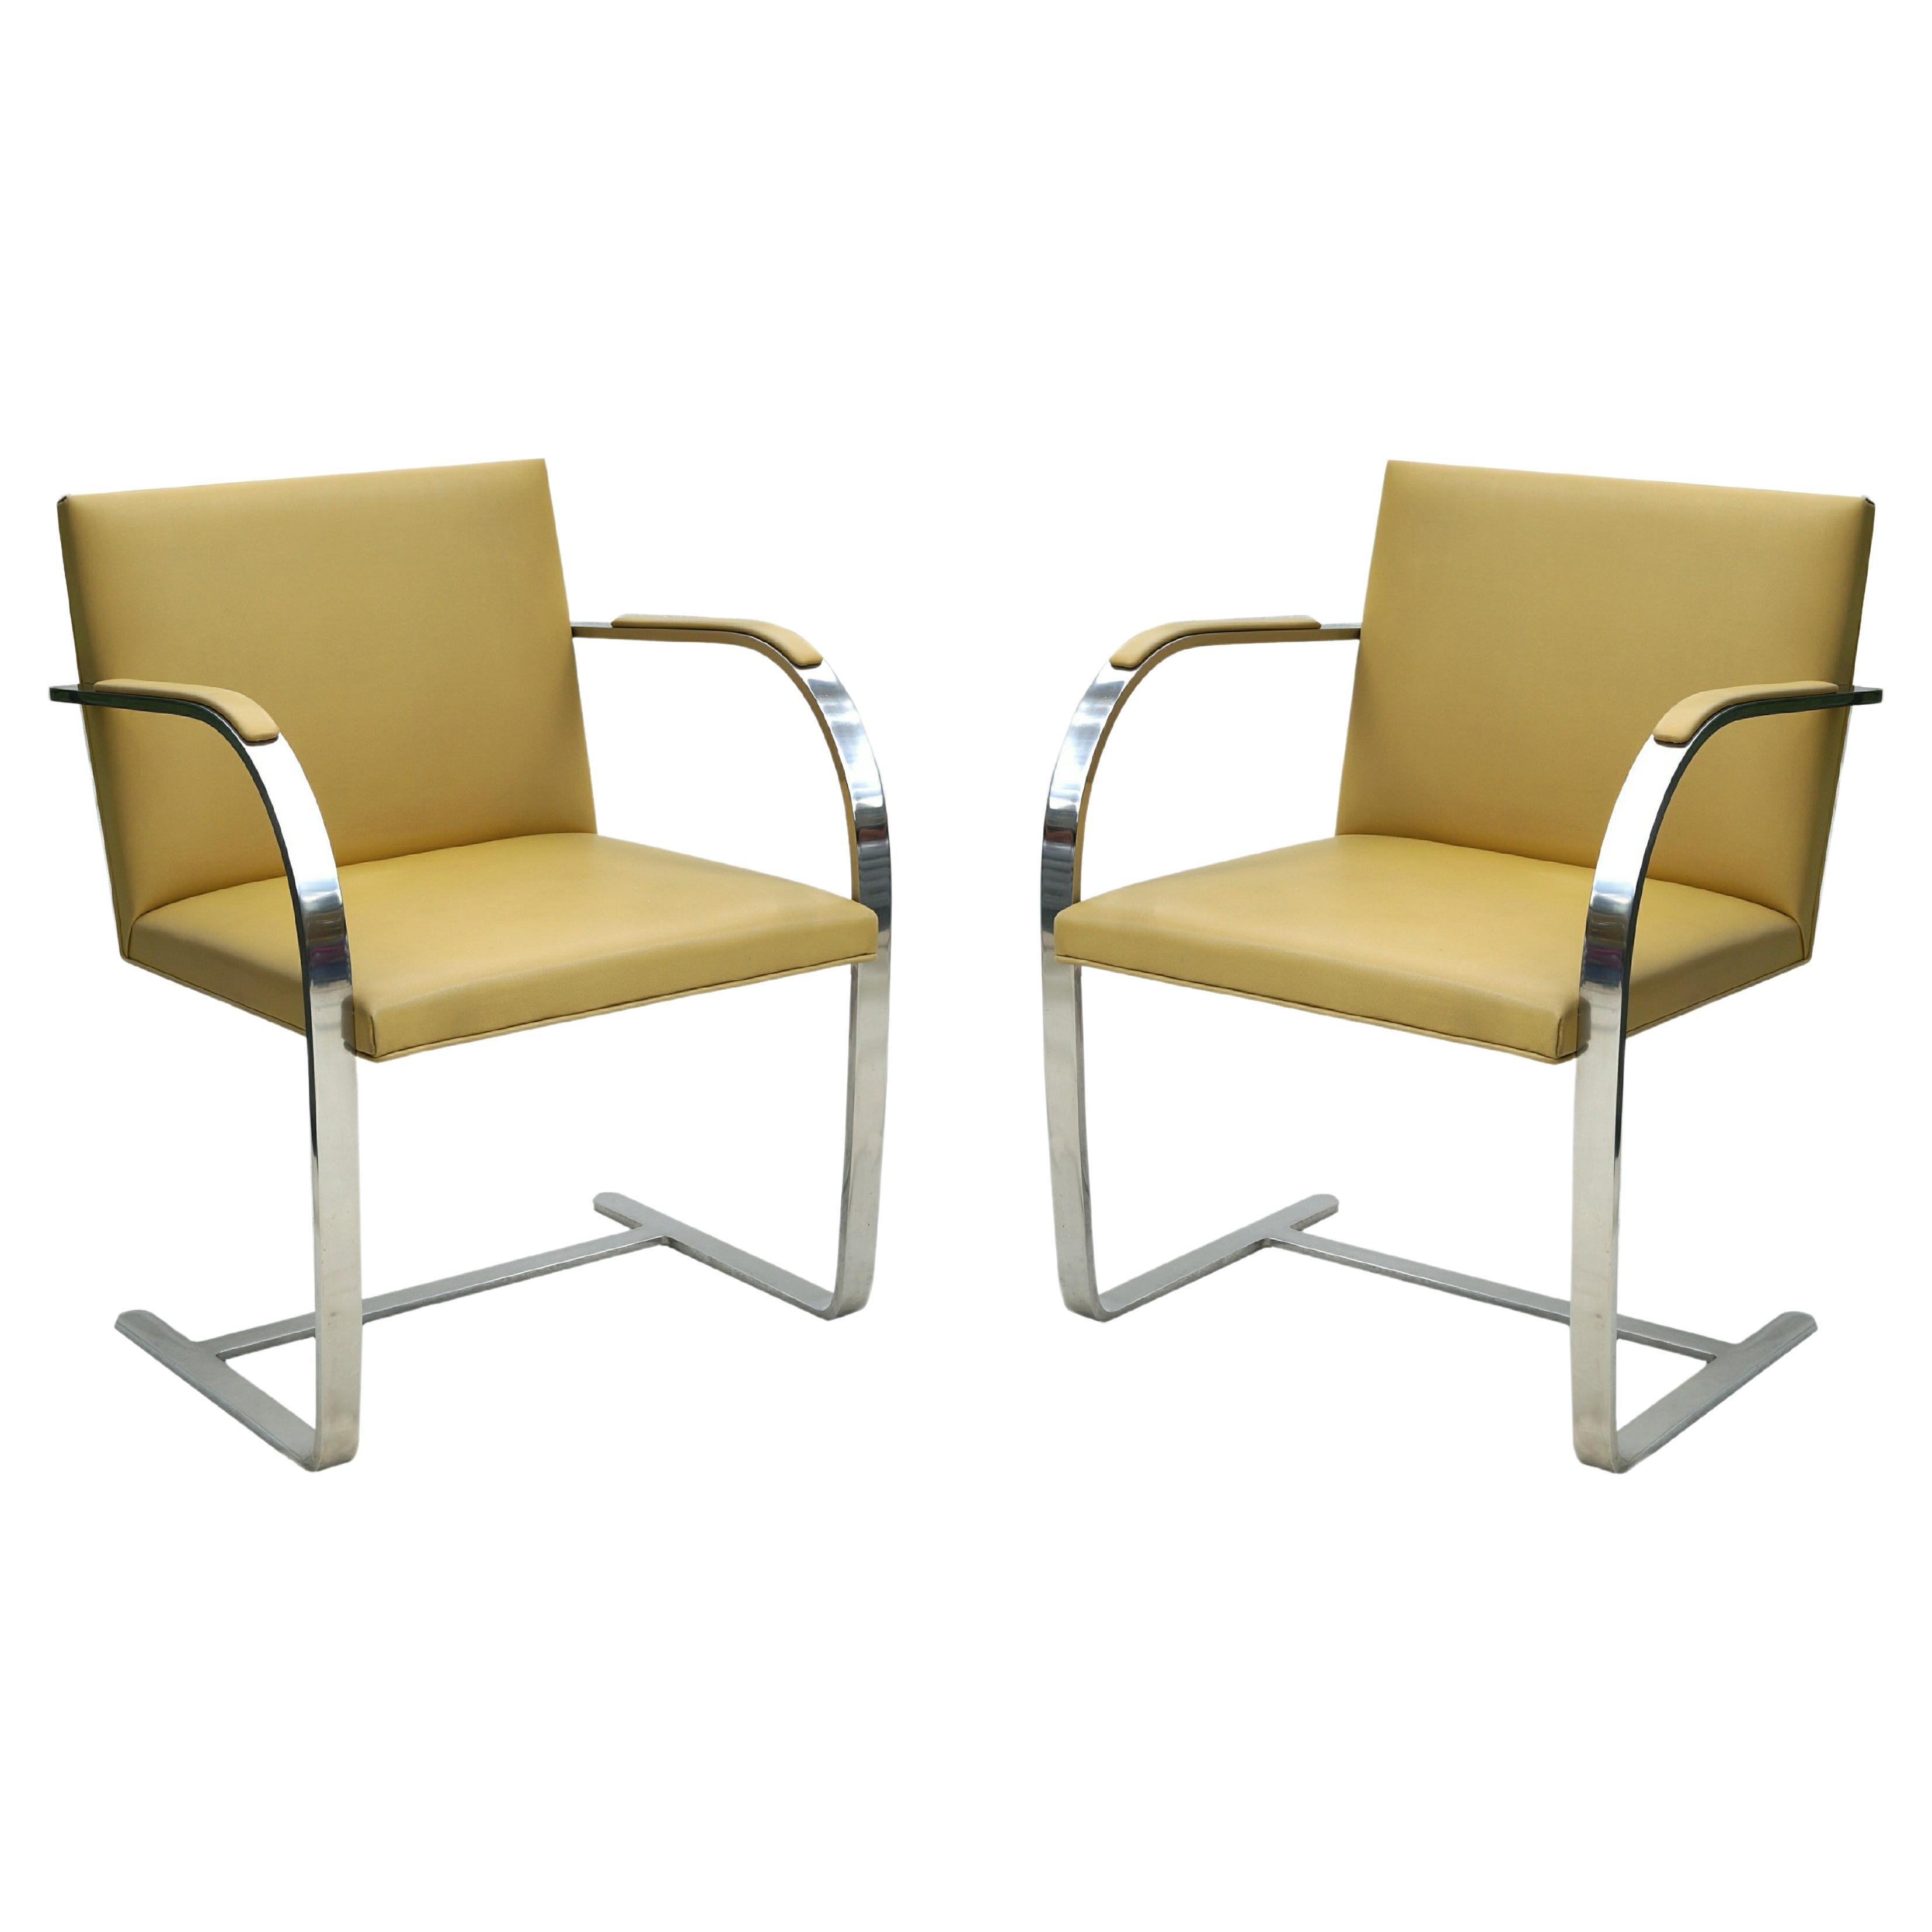 Pair of Knoll International Ludwig Mies van der Rohe Brno Leather Lounge Chairs